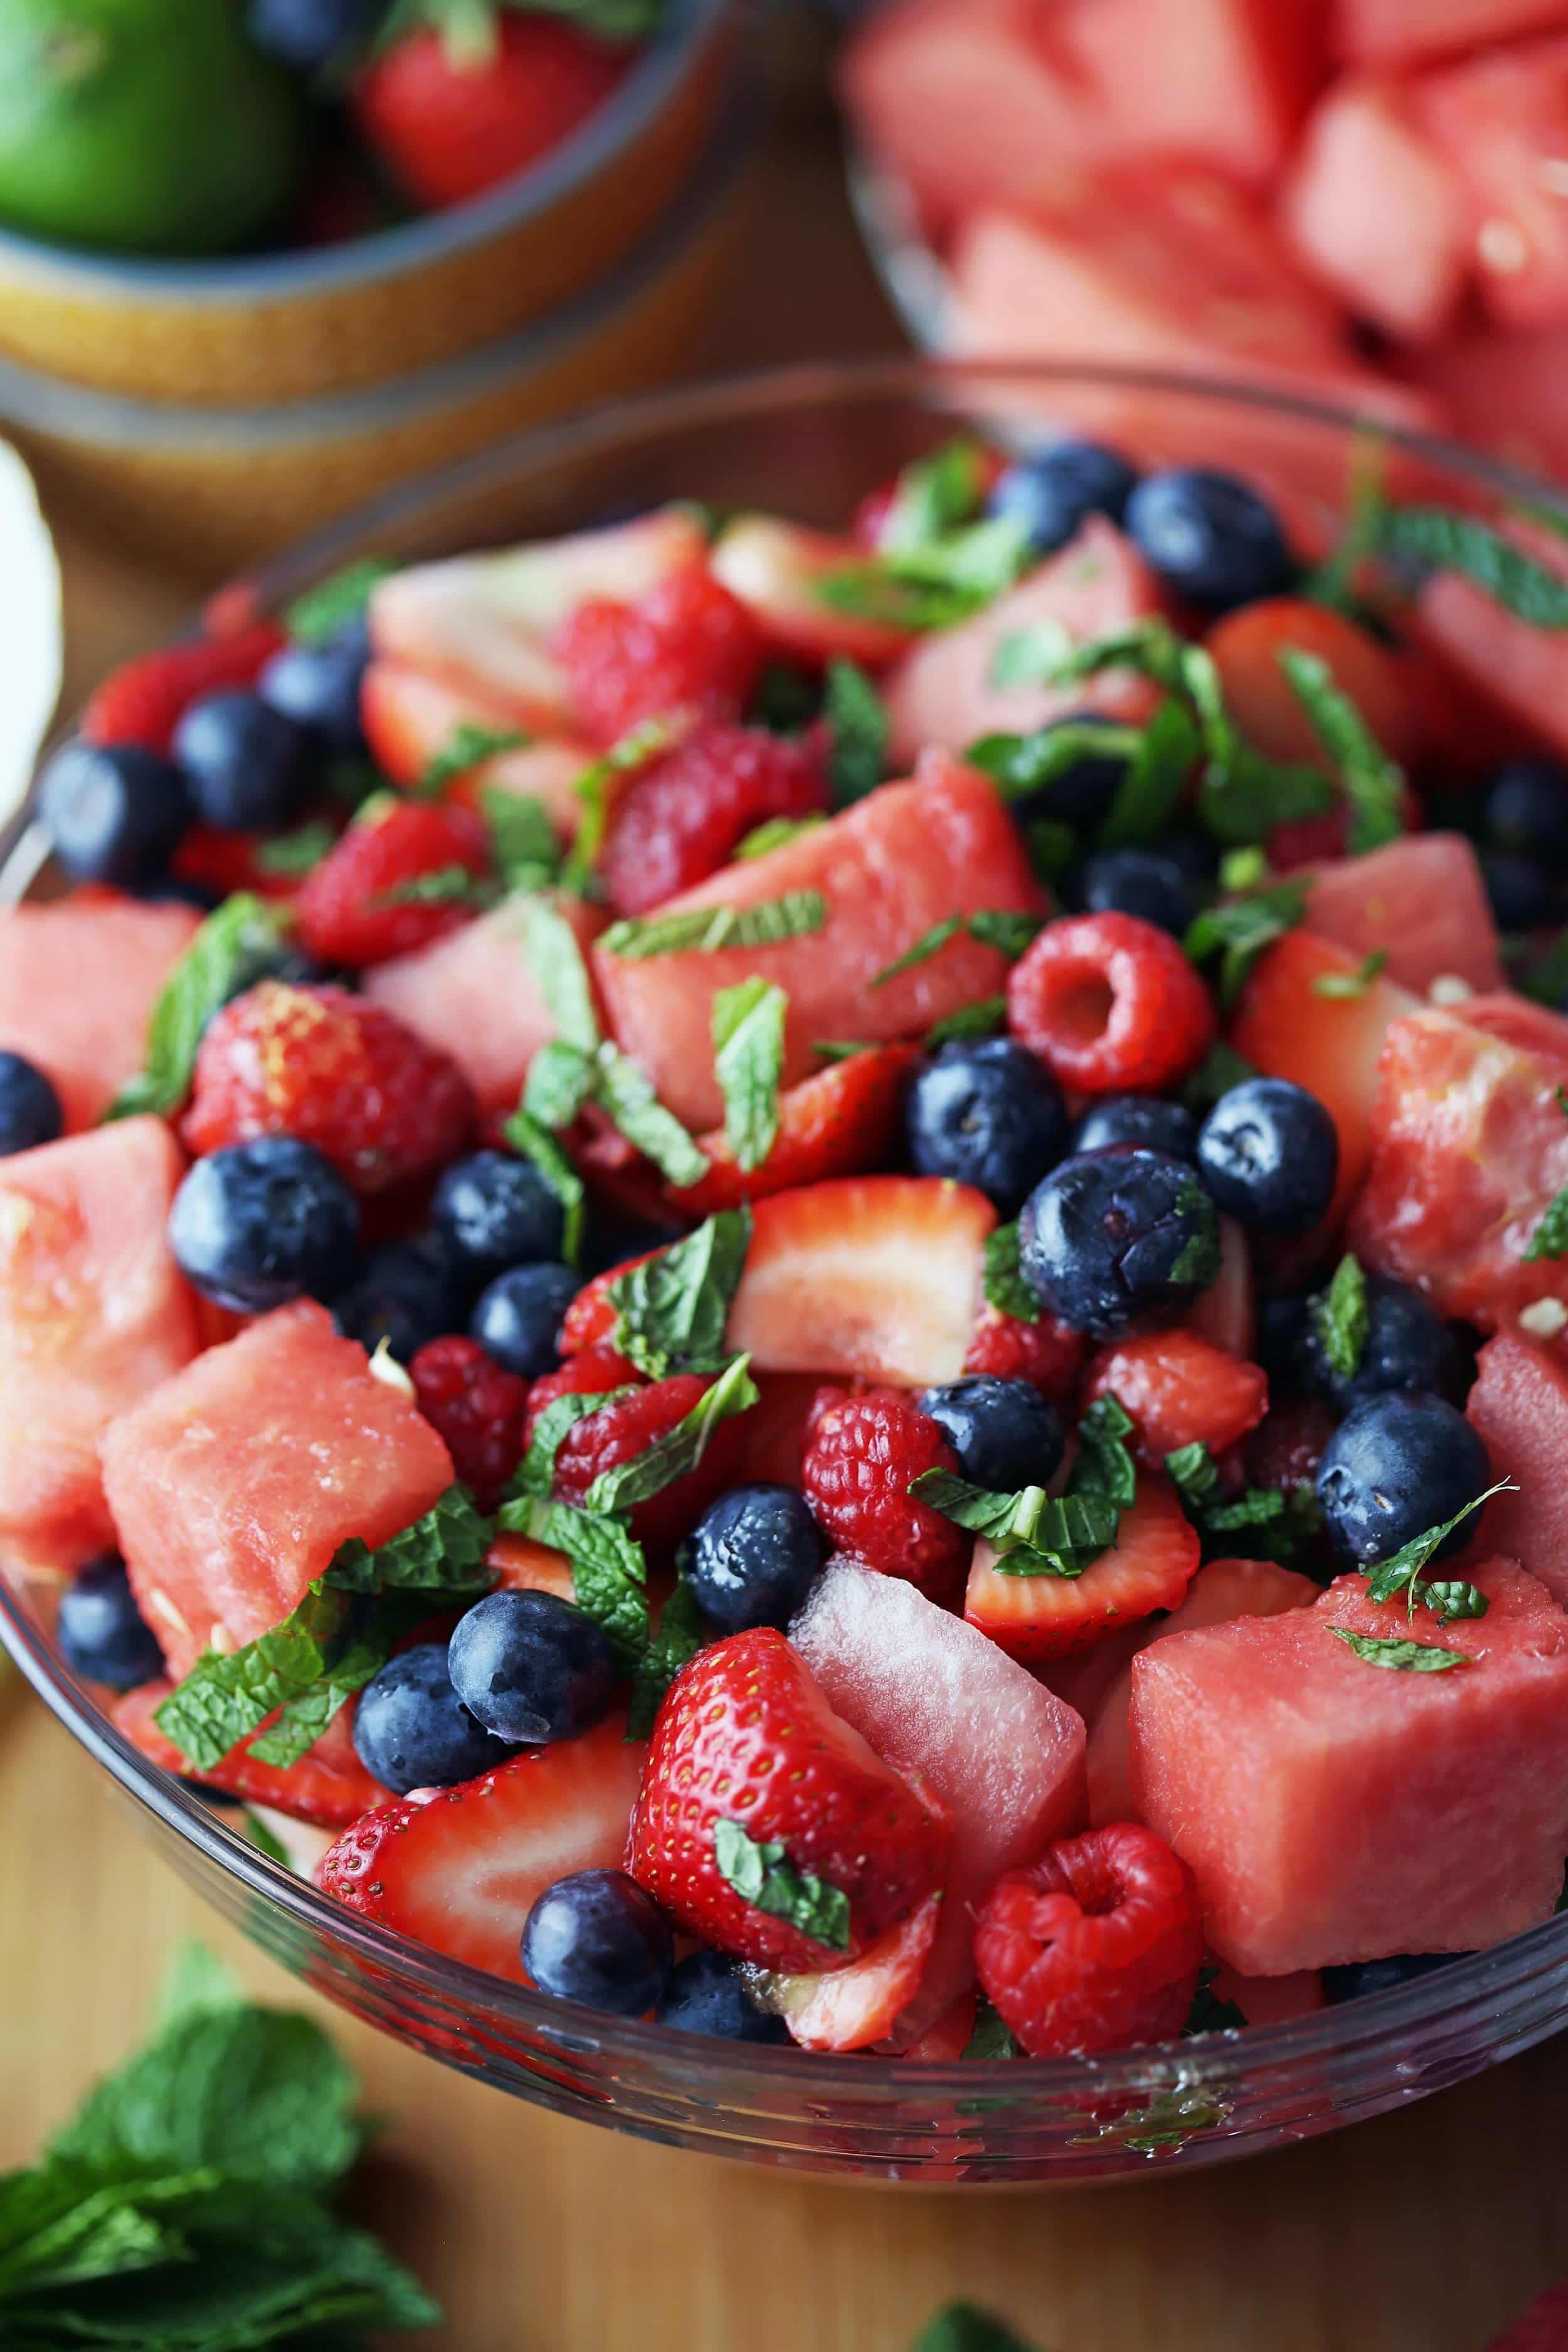 A glass bowl holding a fruit salad, which includes watermelon. strawberries, blueberries, and raspberries.